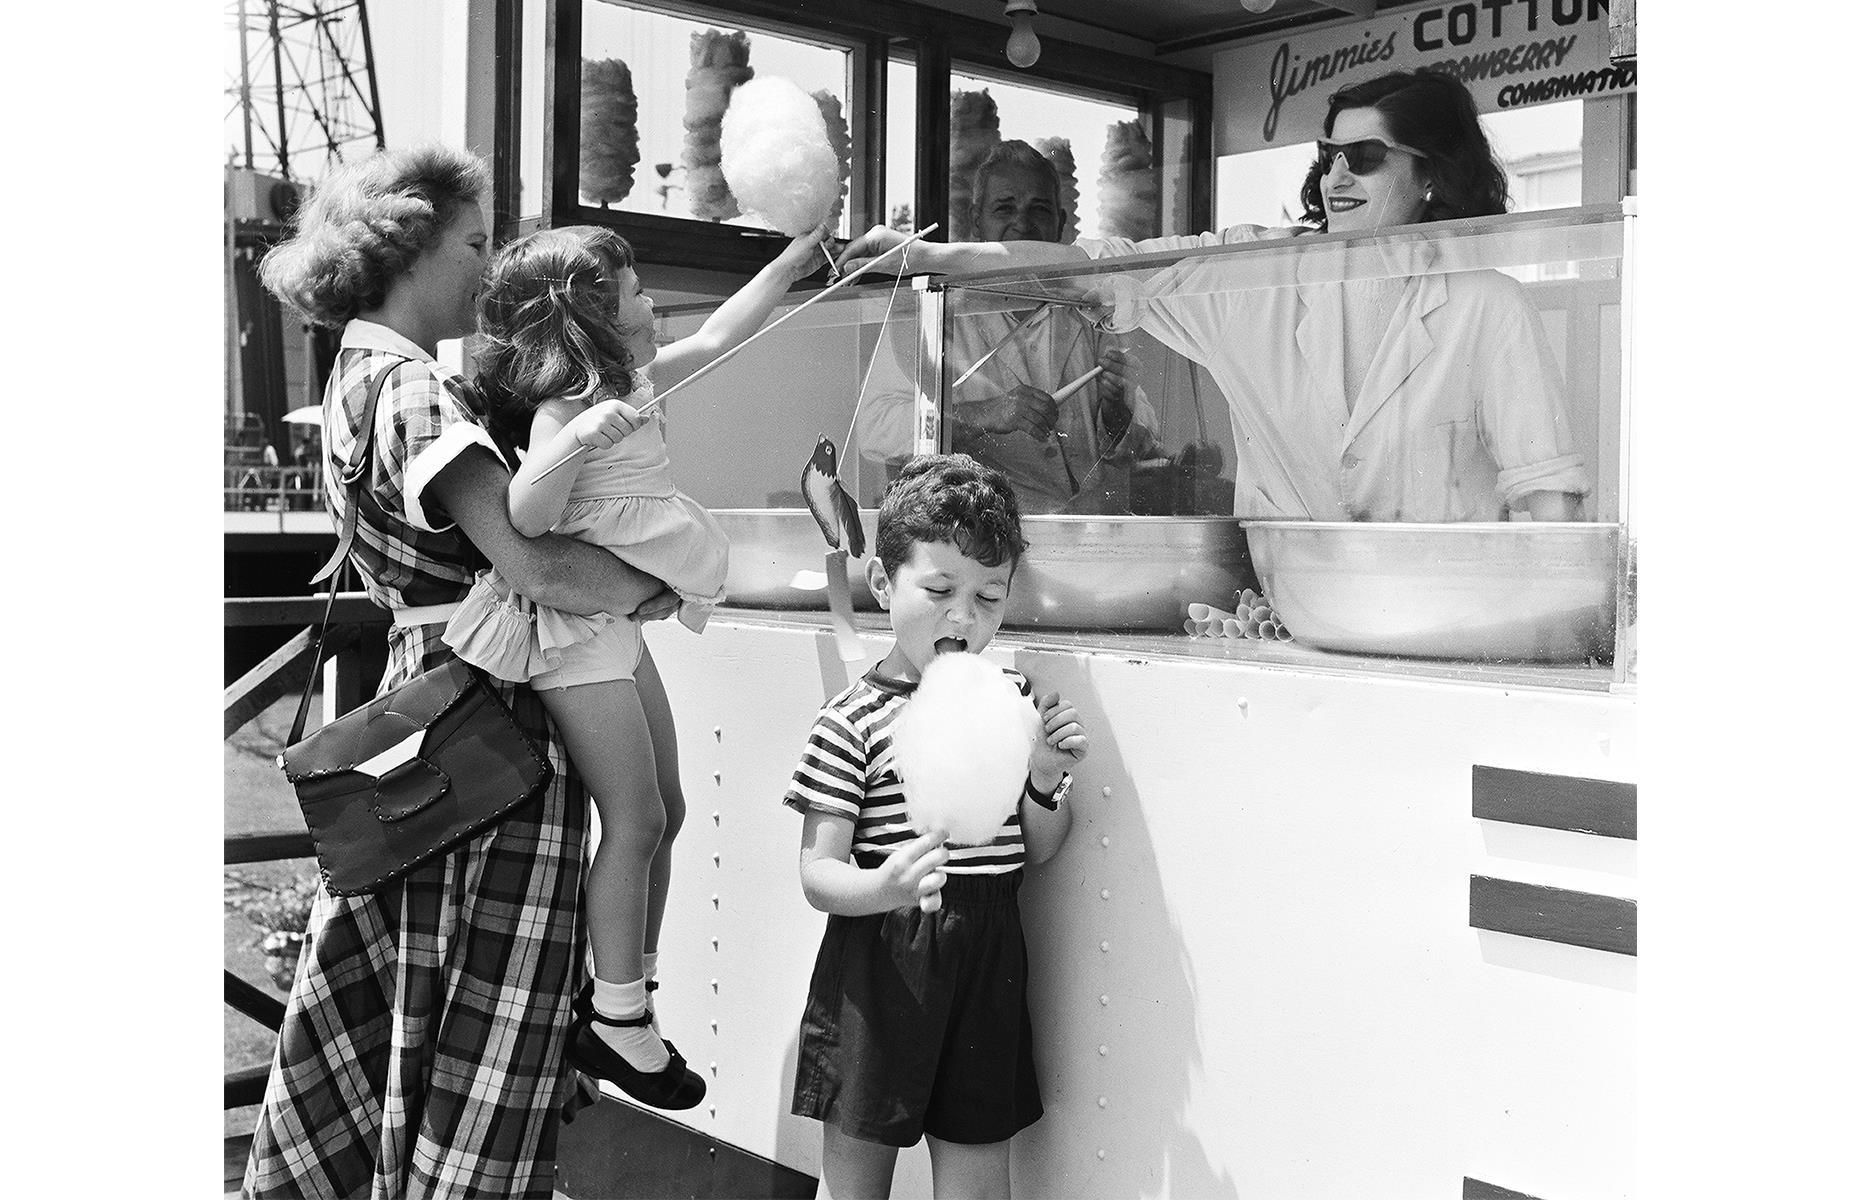 Coney Island attracted holidaymakers with its bounty of sweet treats too. In this gloriously nostalgic snap, a mother lifts up an eager child, so she can accept a sugary cloud from Jimmies cotton candy shack.